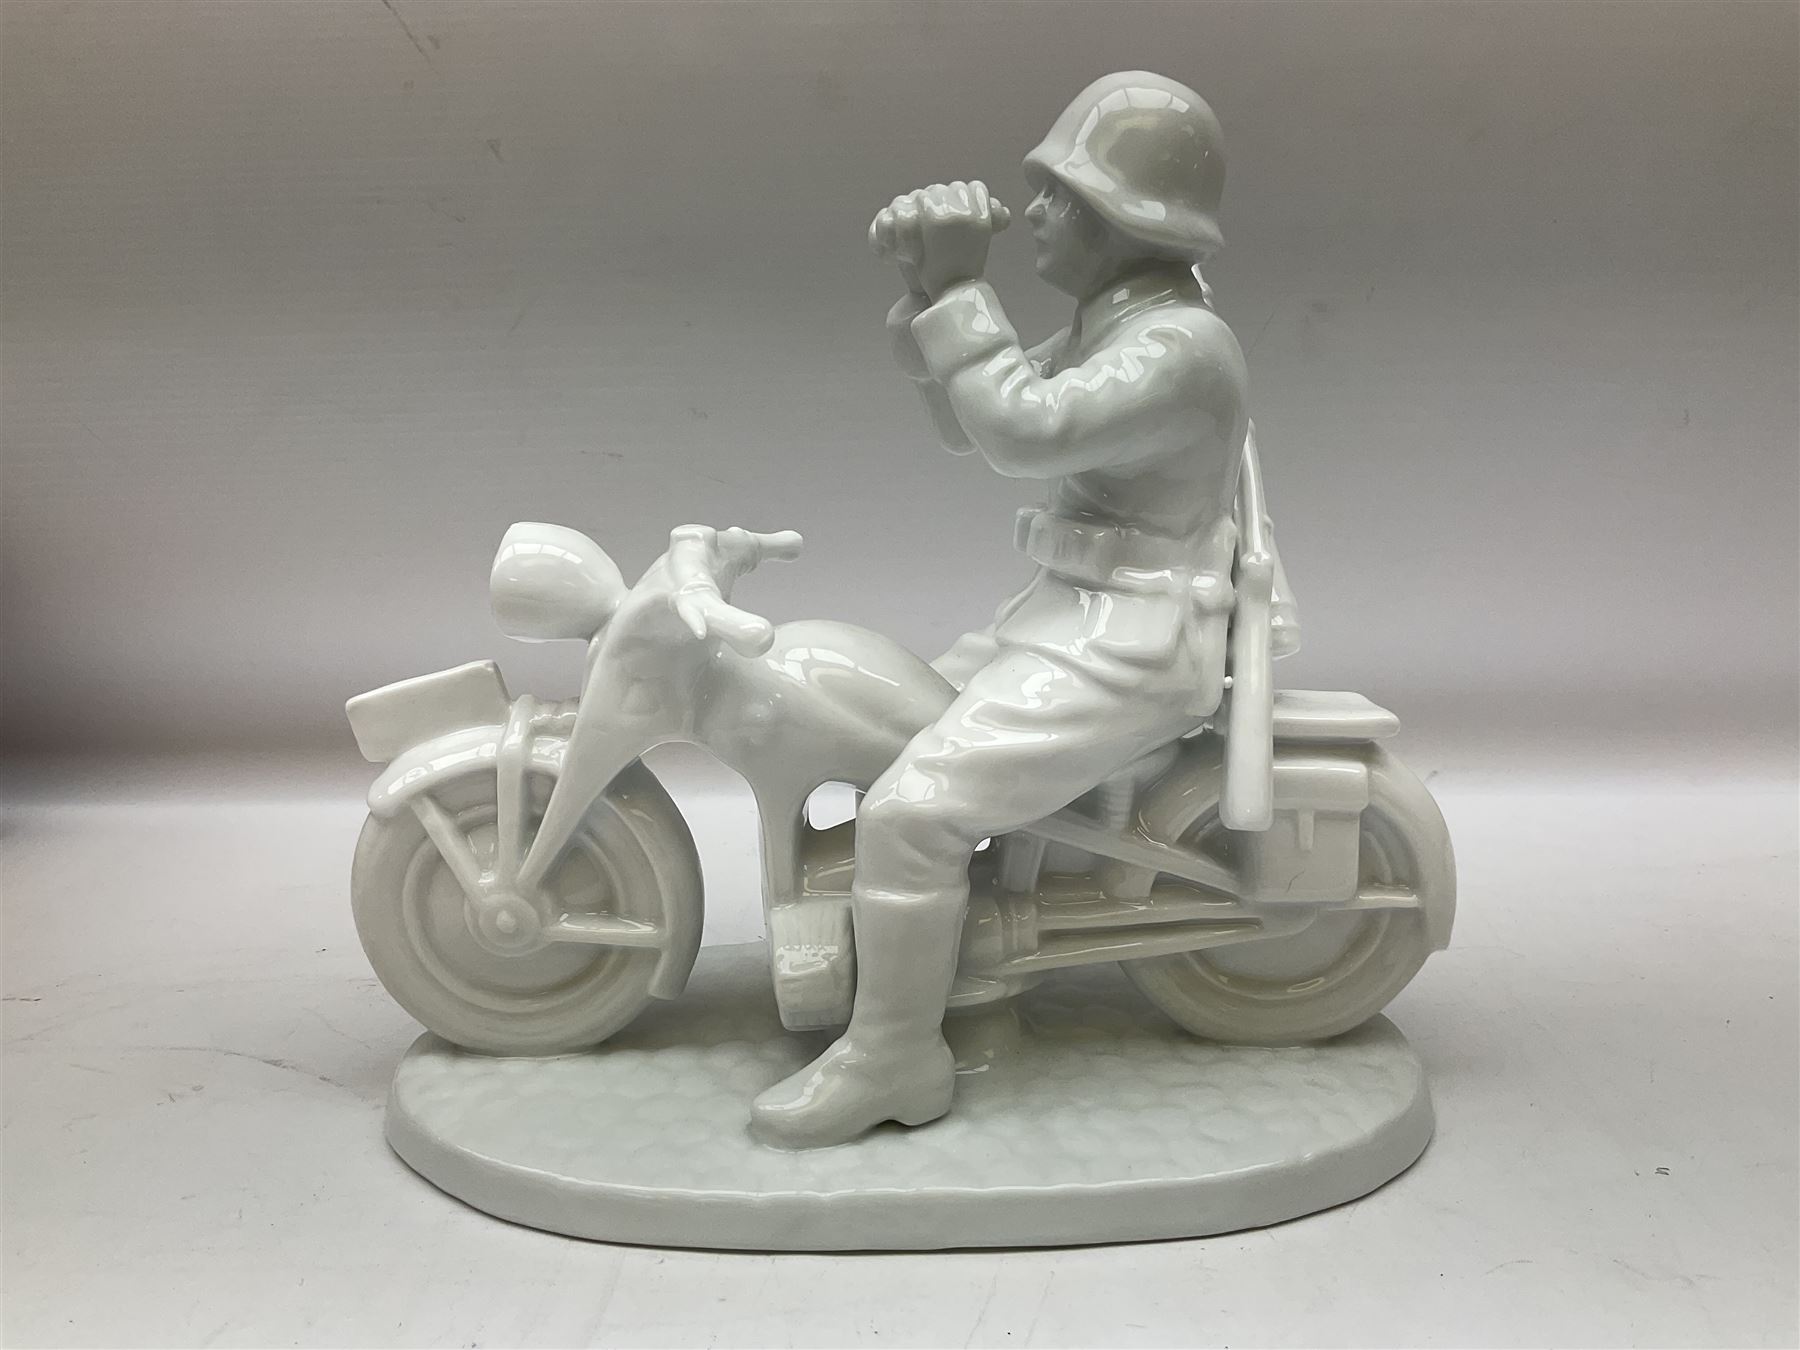 Neundorf figure modelled as a soldier seated upon a stationary motorcycle looking through binoculars - Image 8 of 8